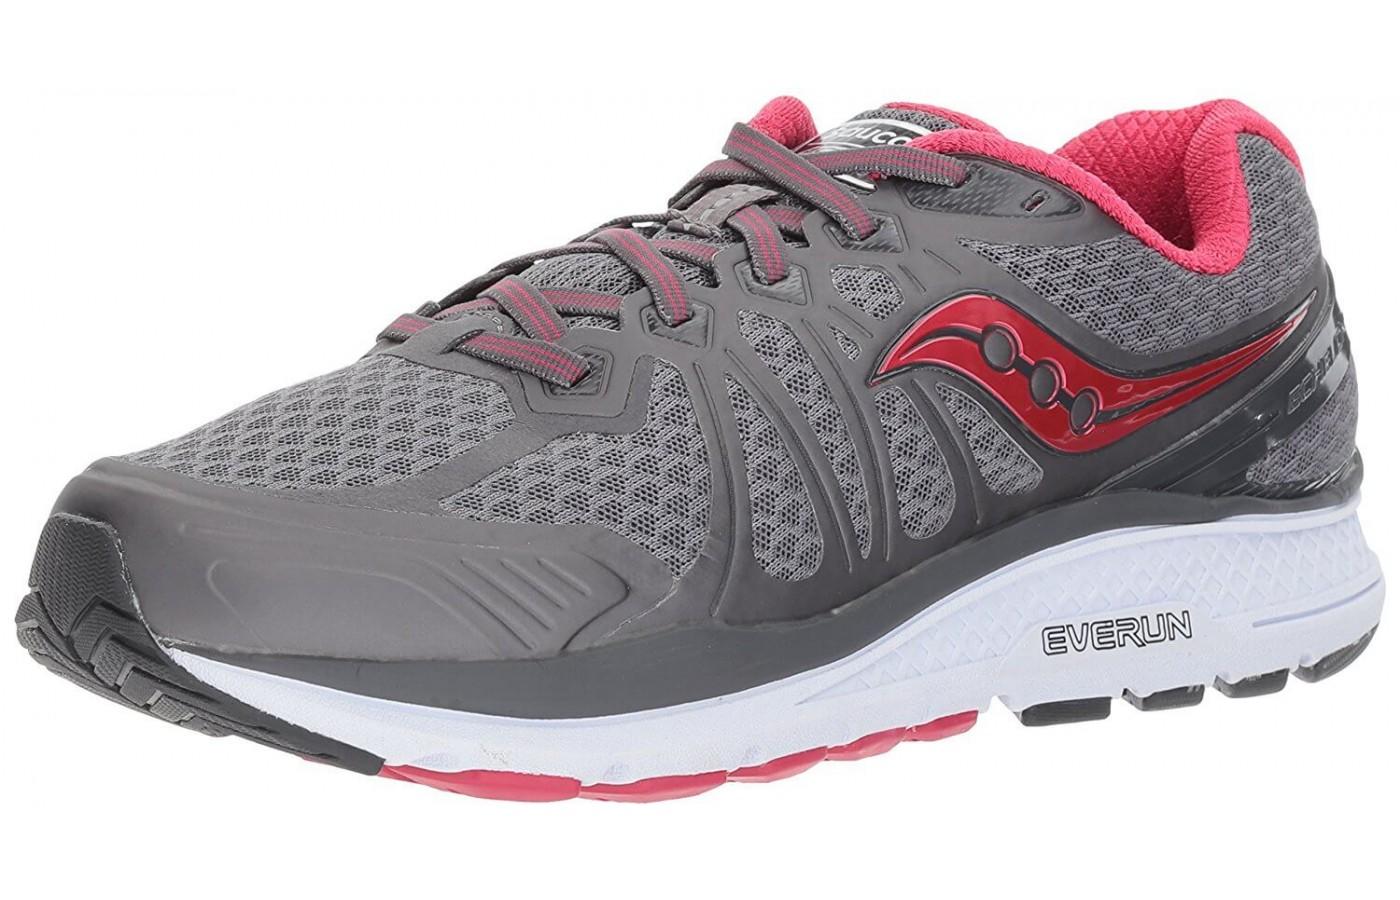 The Saucony Echelon 6 shown from the front/side